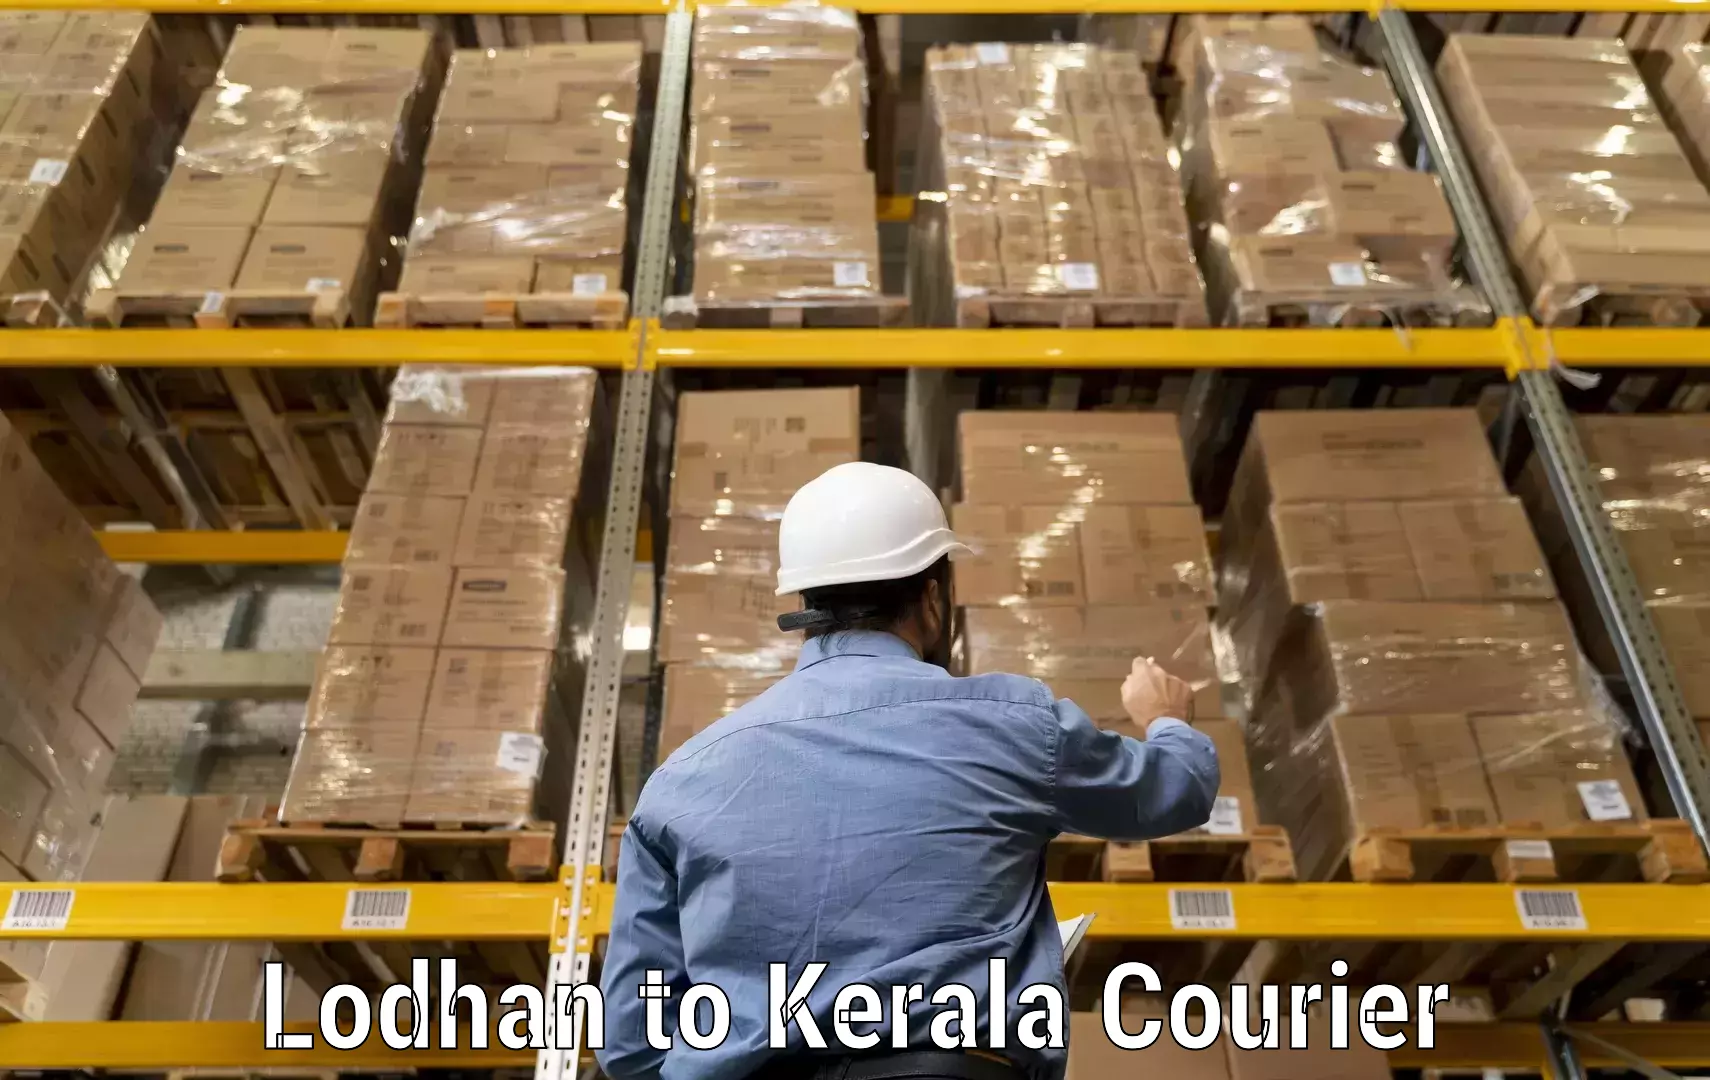 Advanced delivery network Lodhan to Kerala